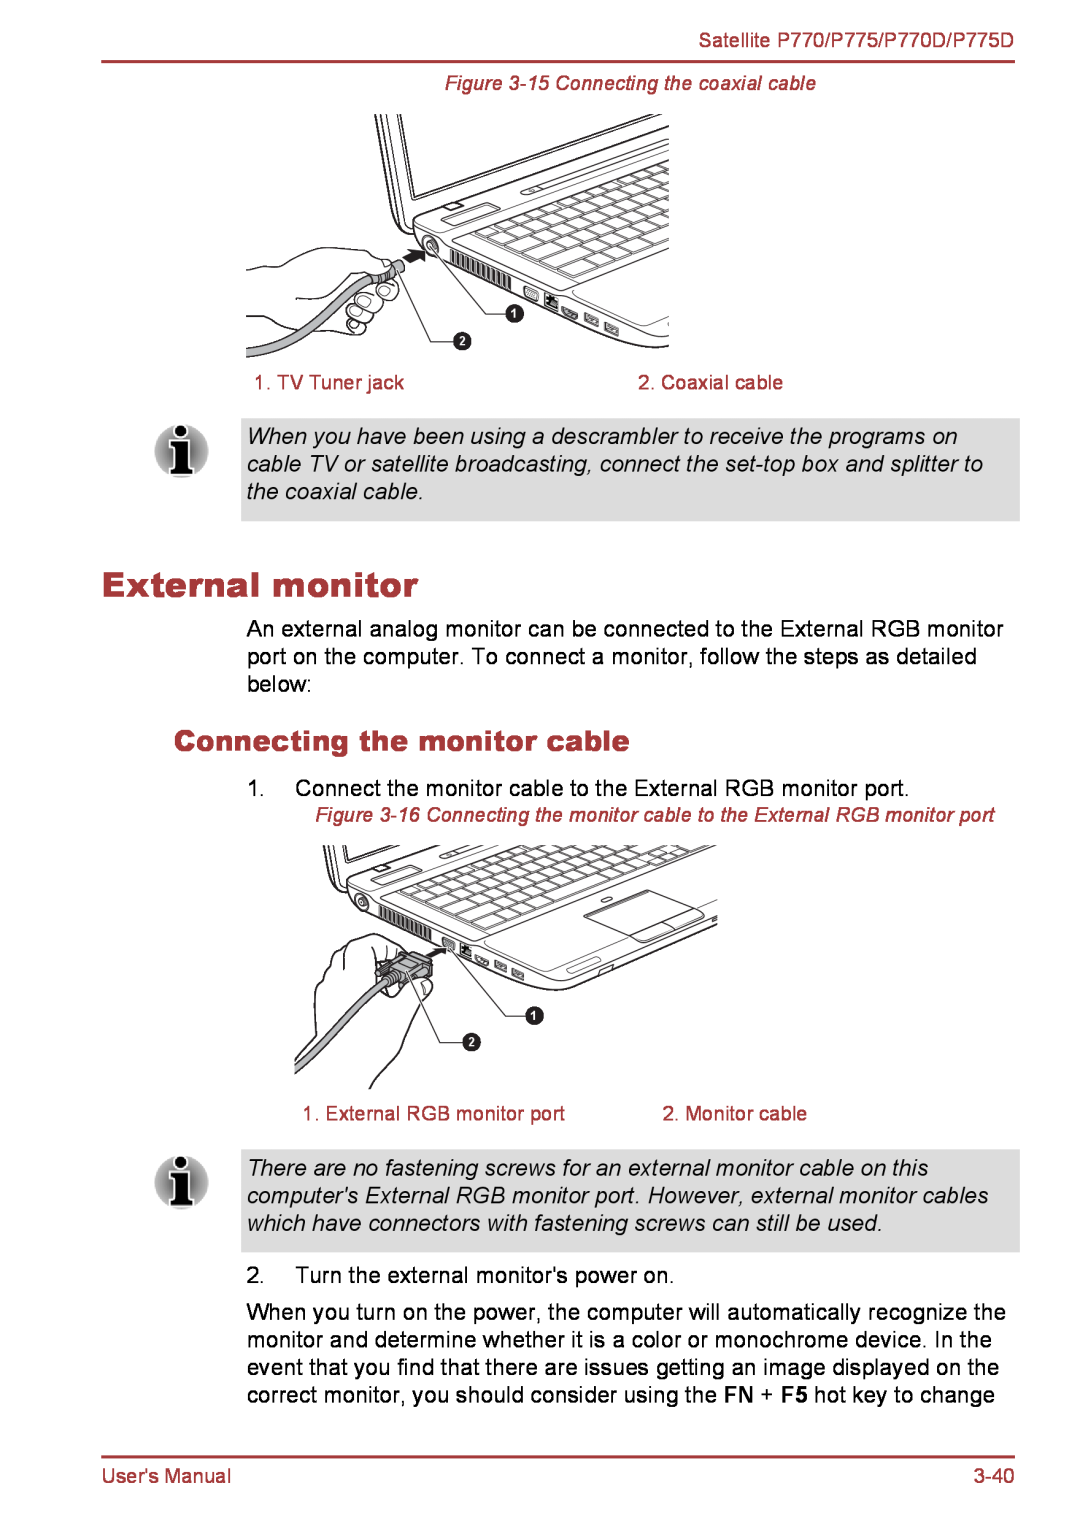 Toshiba P770 user manual External monitor, Connecting the monitor cable 